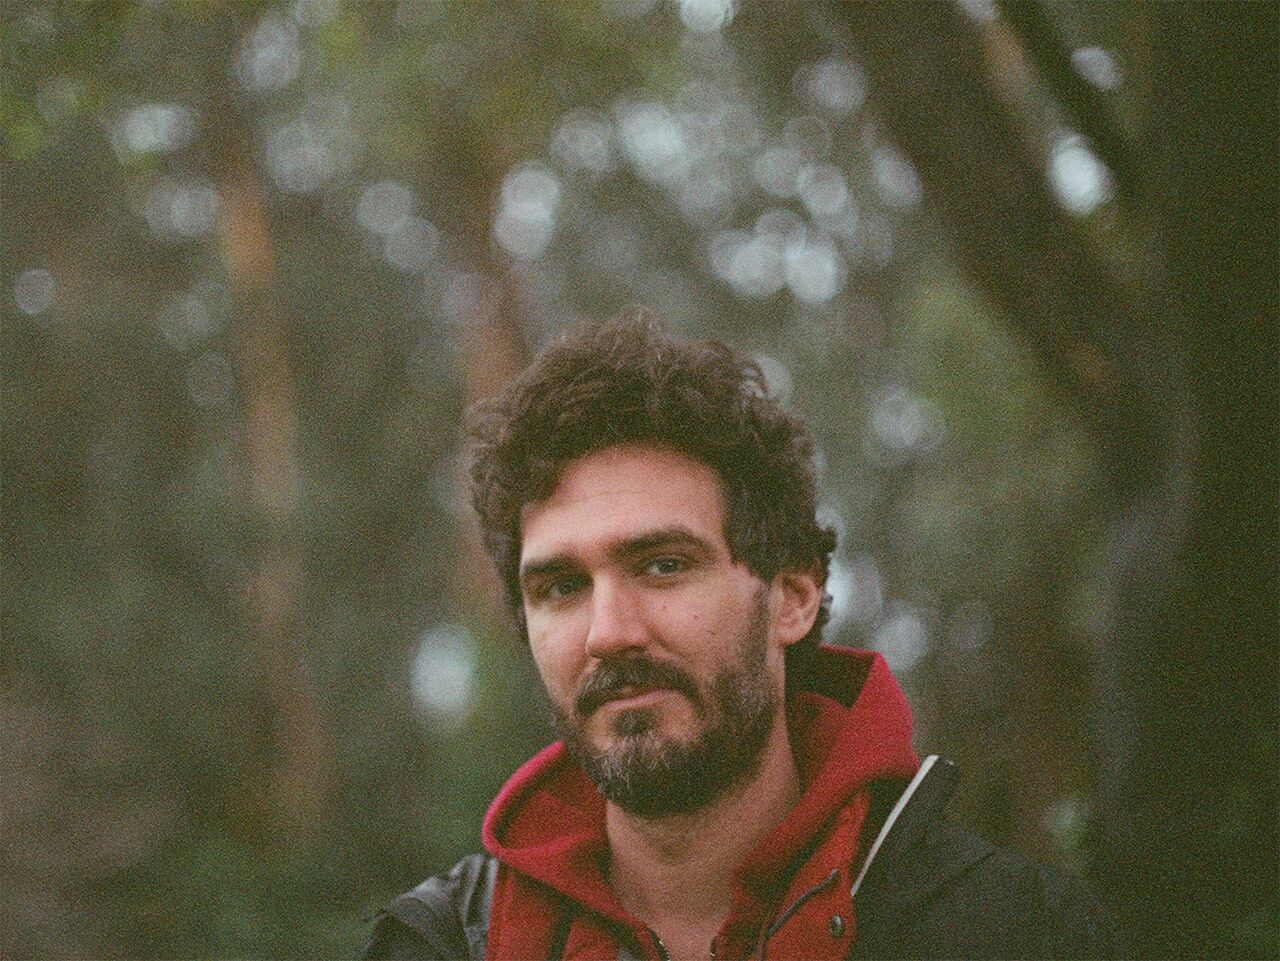 "Opening" by producer/engineer Rob Shelton, is Northern Transmissions' 'Song of the Day.' The track is off his forthcoming release Eight Lines/The Seer